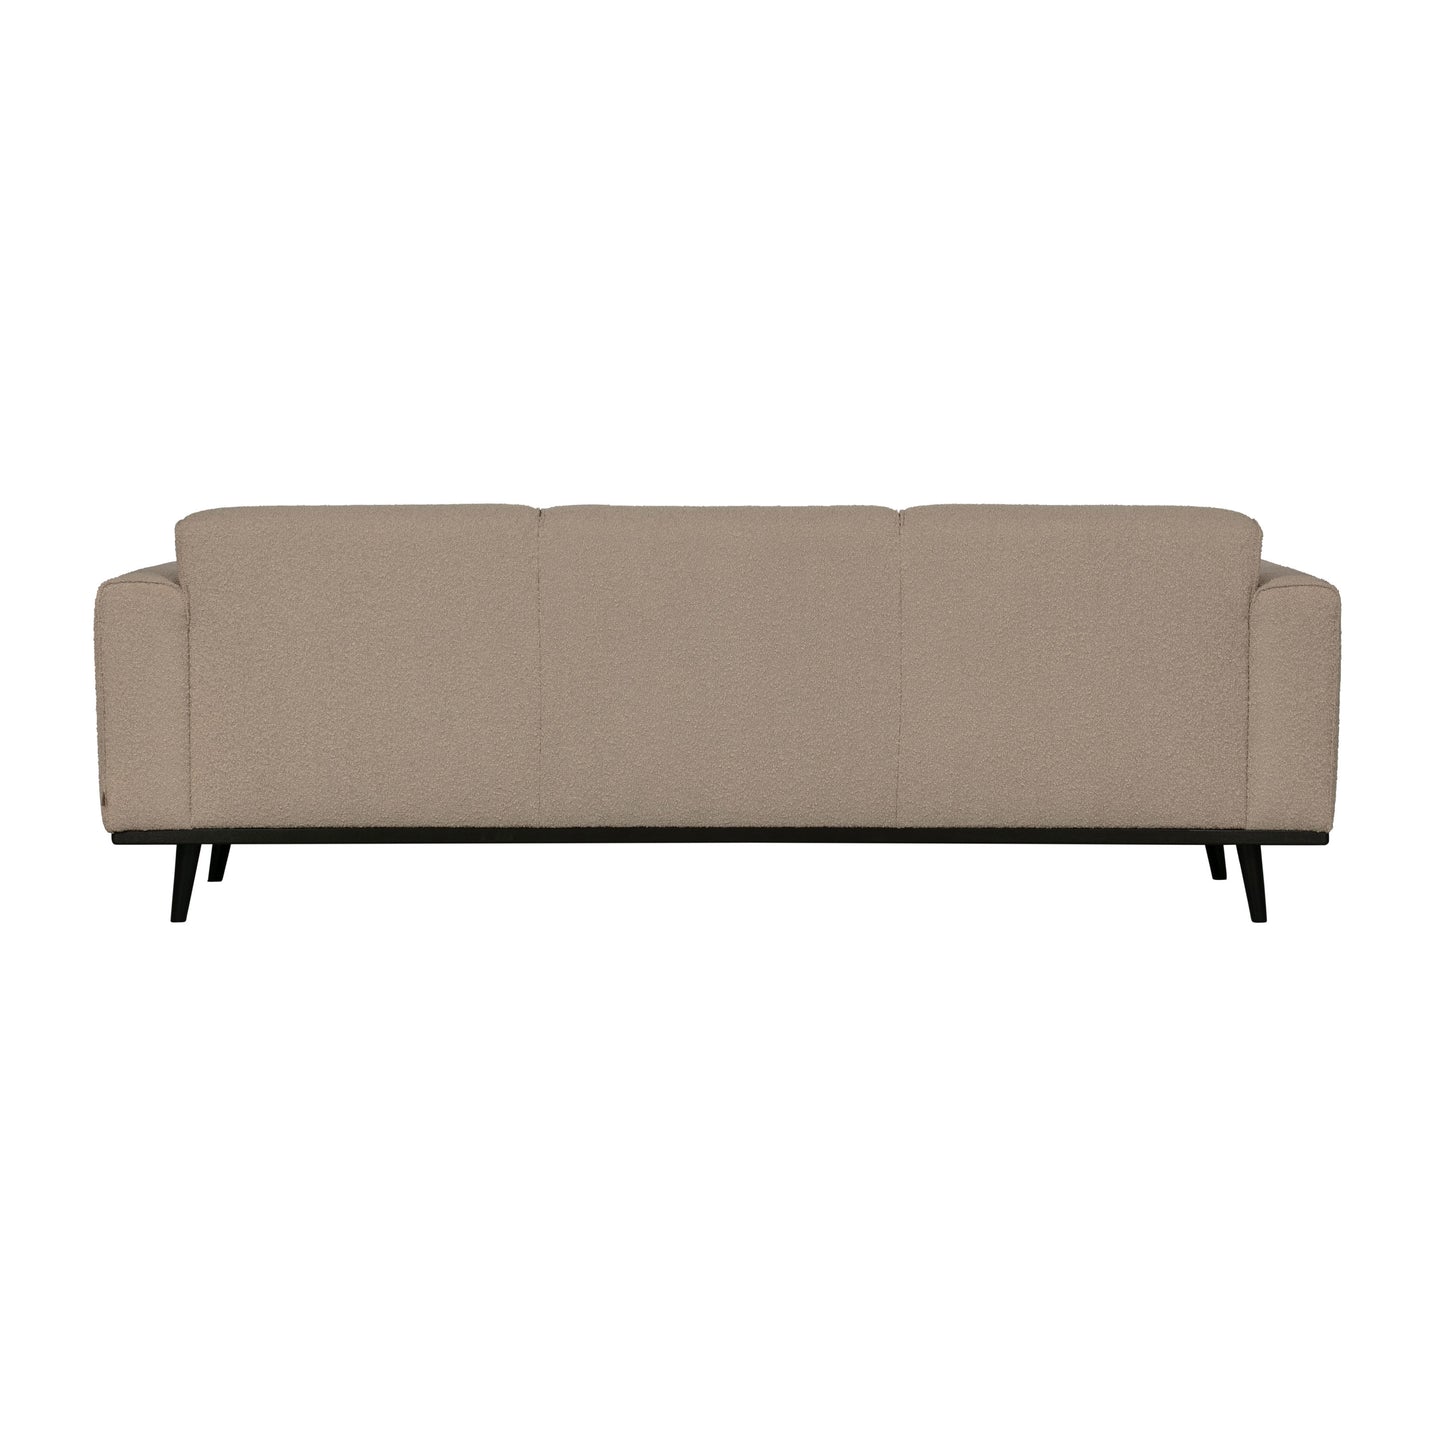 Statement 3-seater boucle beige